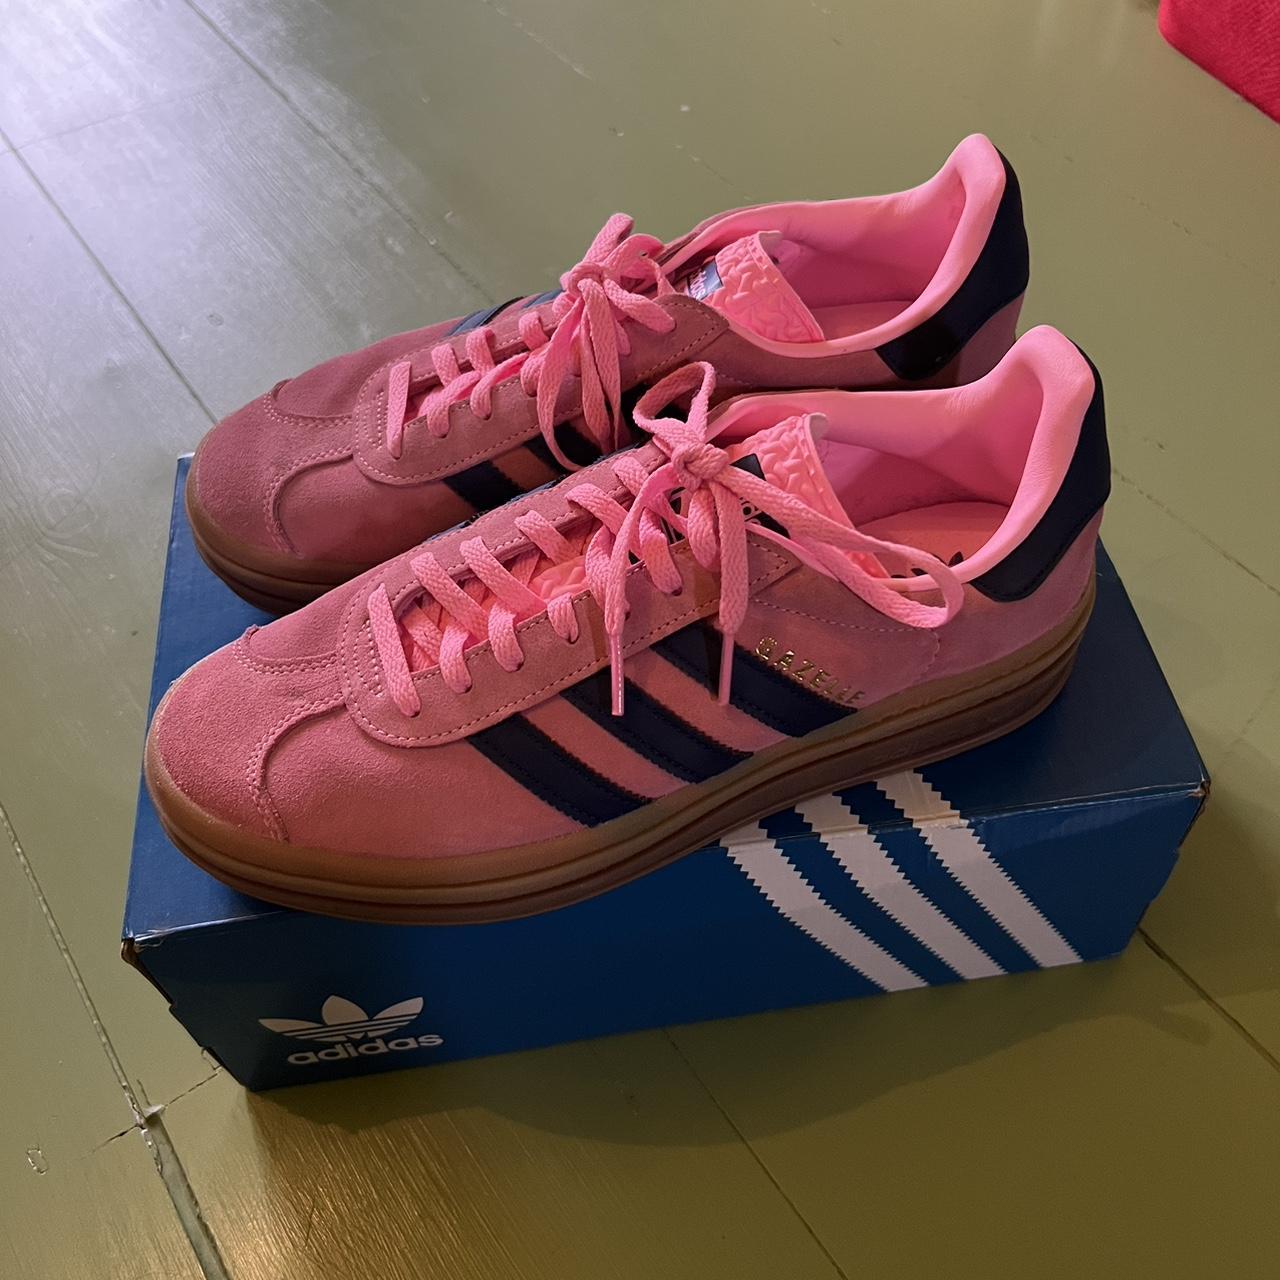 Adidas gazelles bold in pink only worn once and in... - Depop